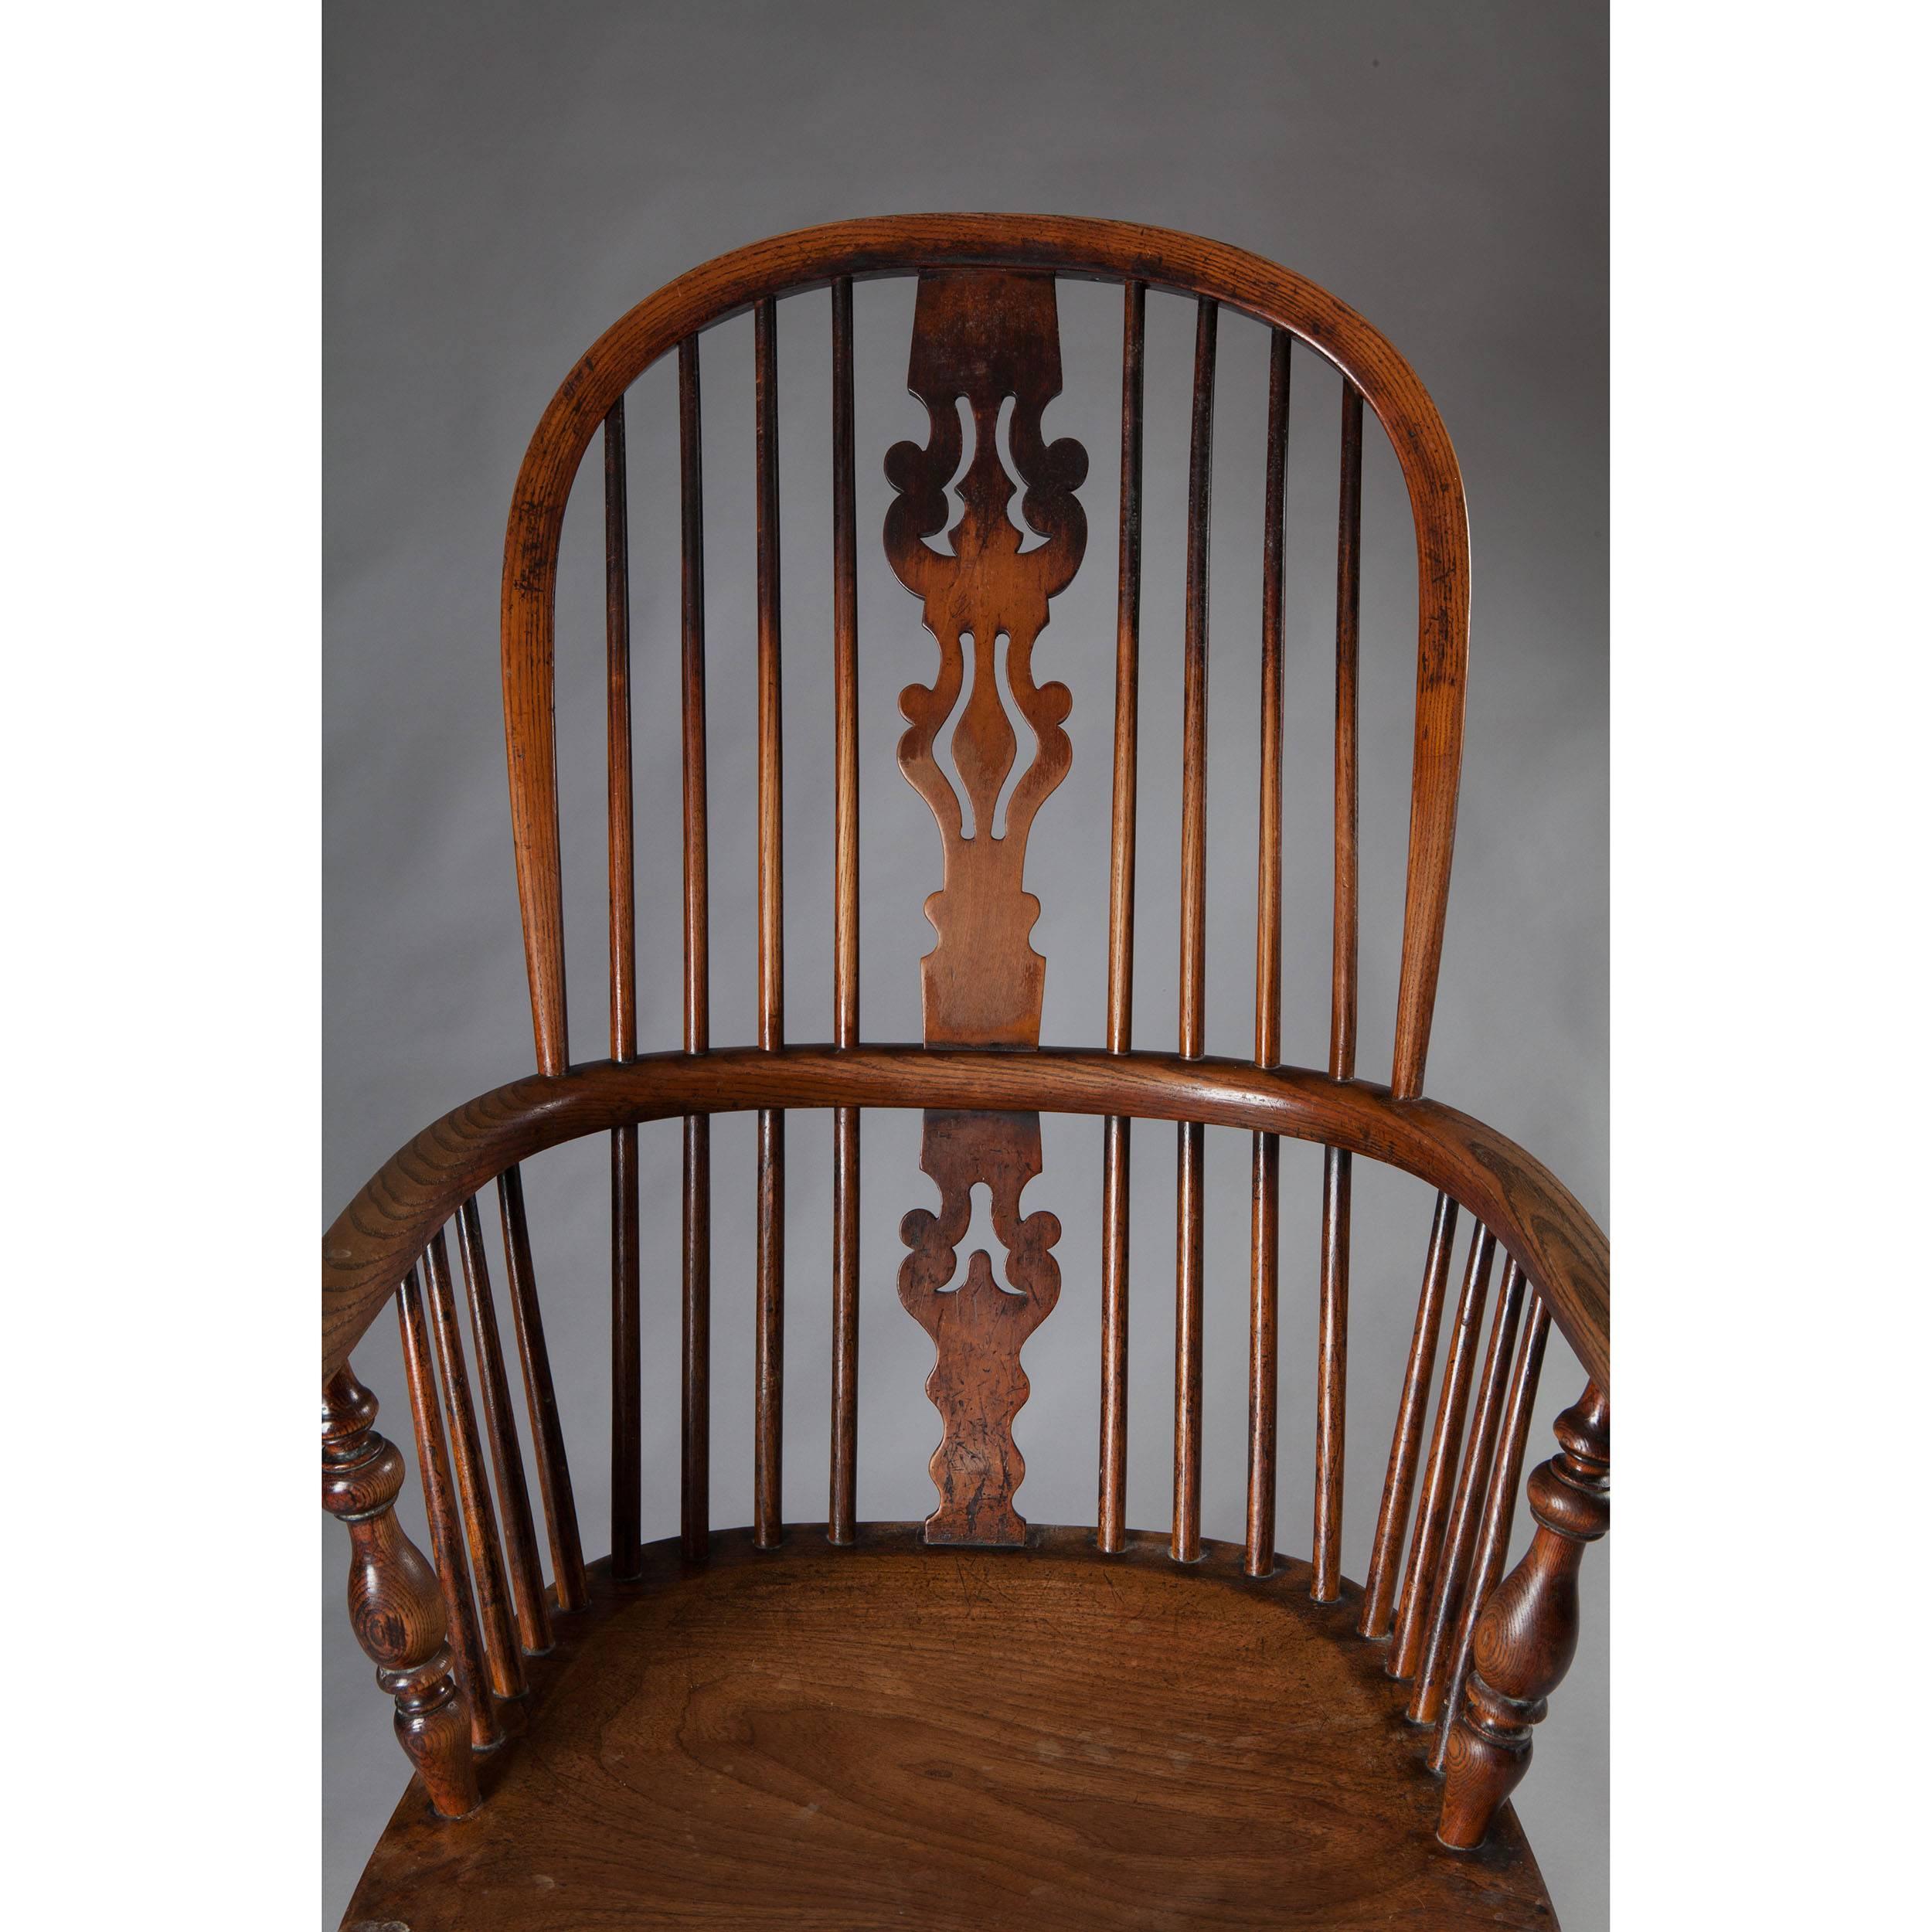 wooden chairs for sale